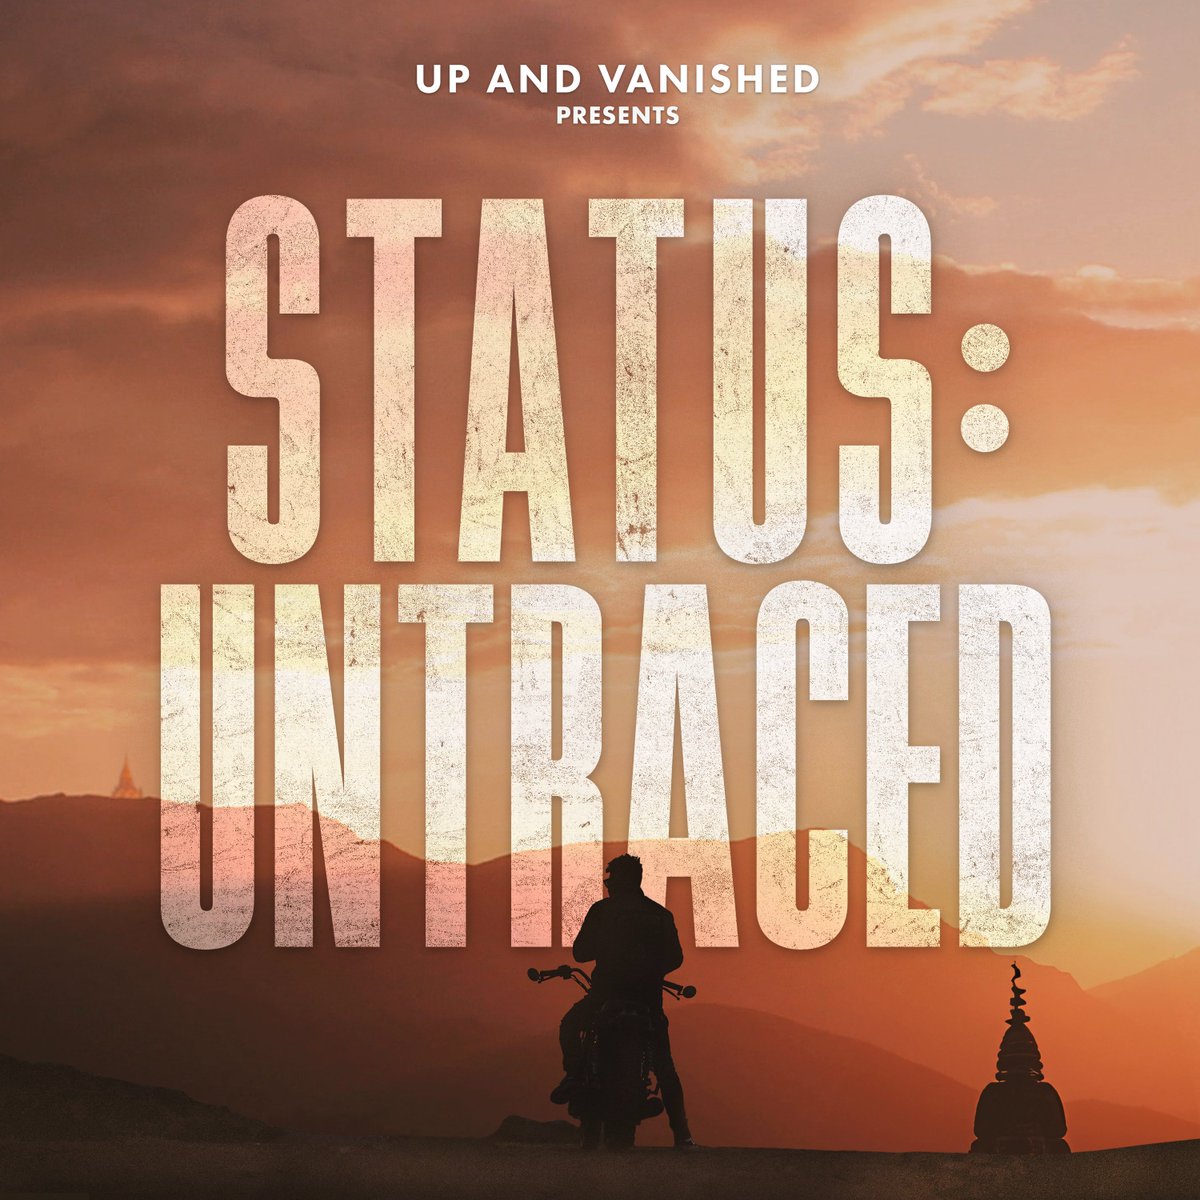 A gripping new true crime podcast @statusuntraced  investigates the disappearance of world traveler Justin Alexander. 

🎙️ Tune in now to @statusuntraced 👉 lnk.to/statusuntraced

Presented by @UpandVanished, home of @TenderfootTV